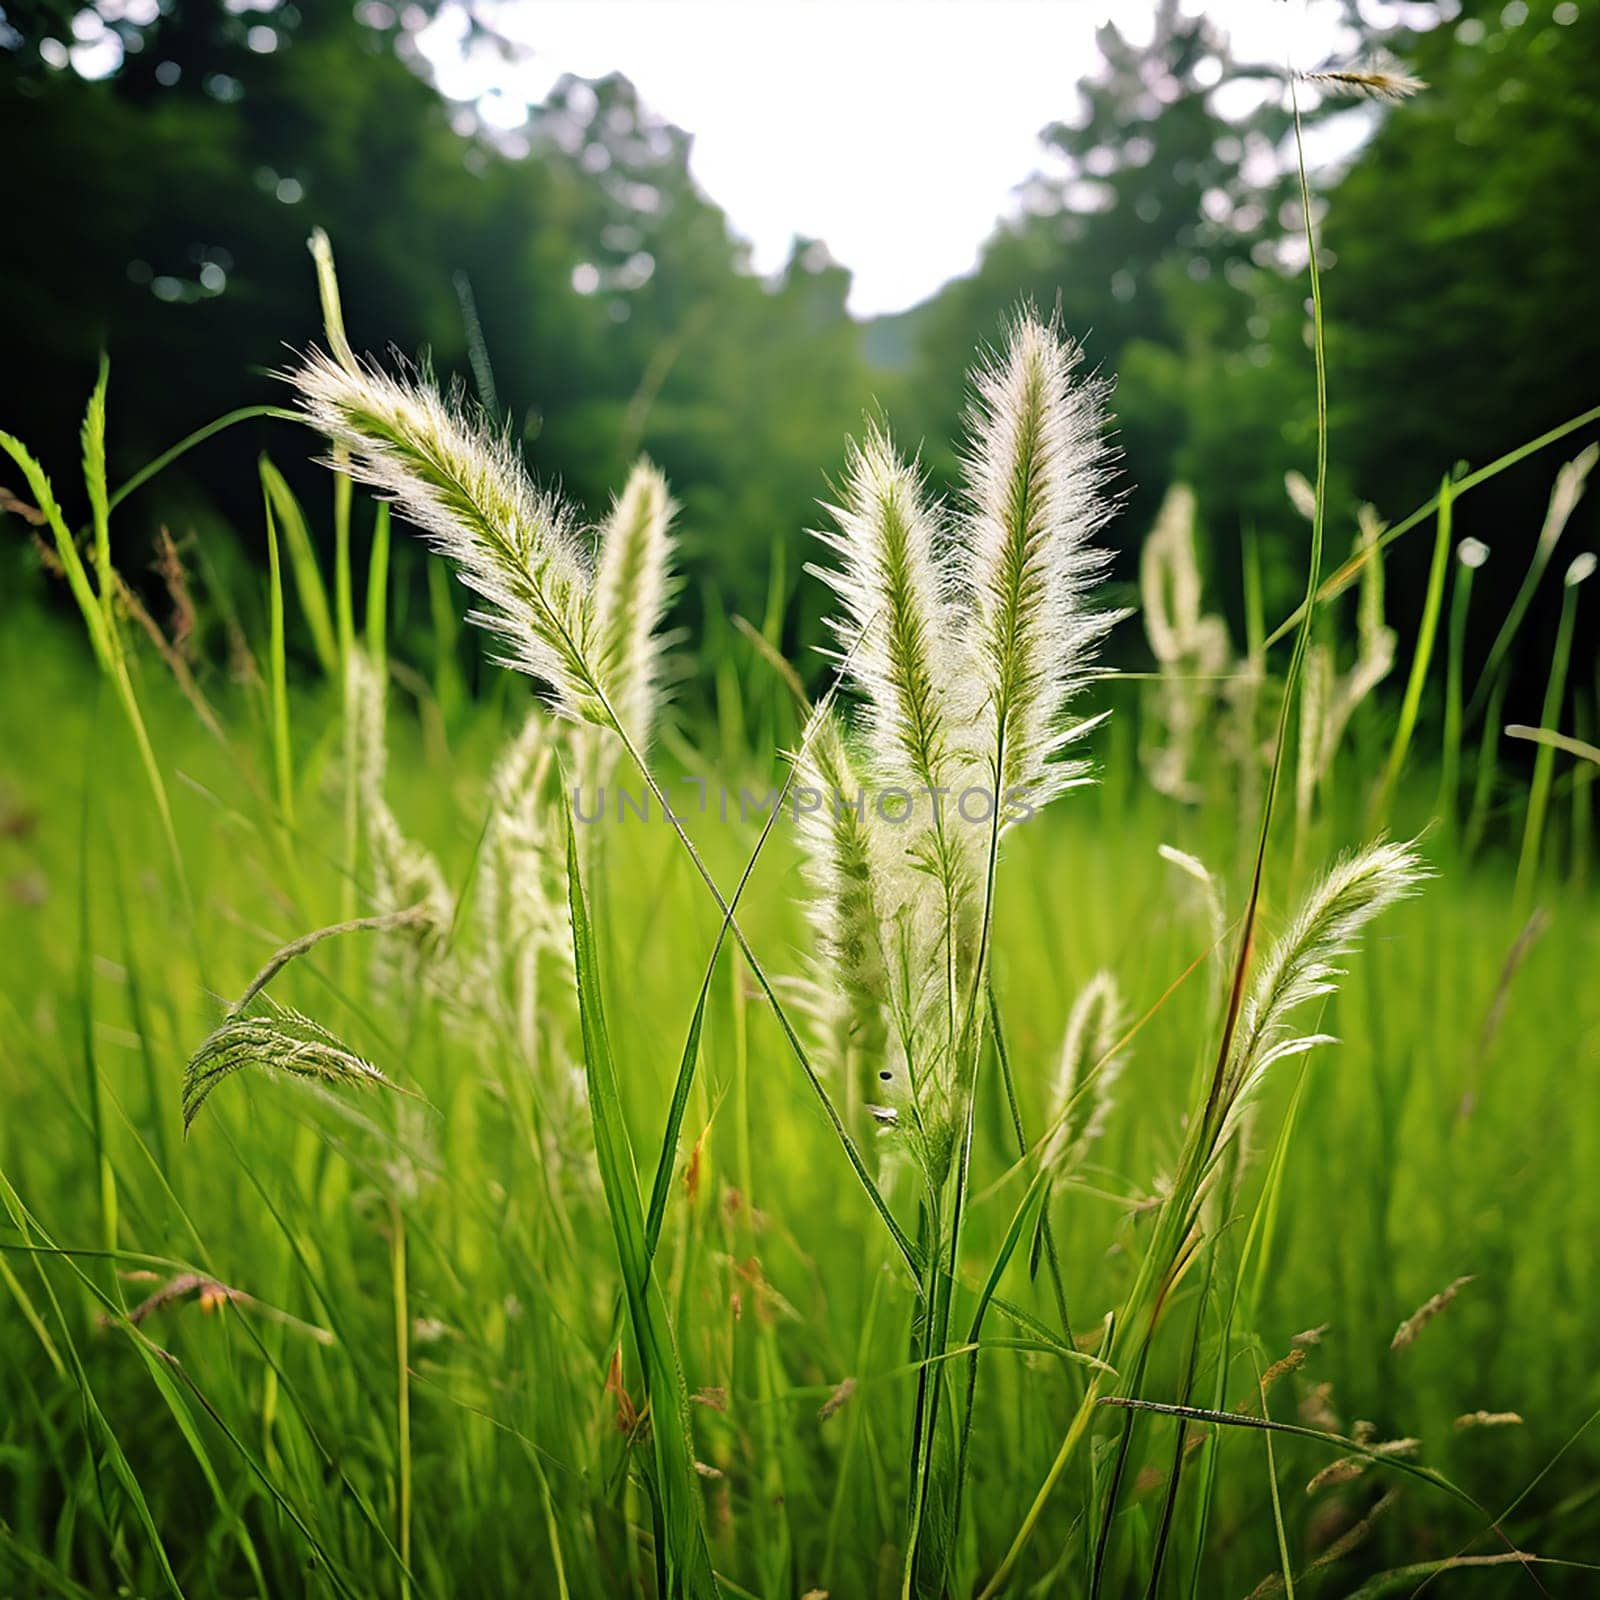 Graceful Elegance: Sunlight and Dancing Wildgrass in a Scenic Meadow